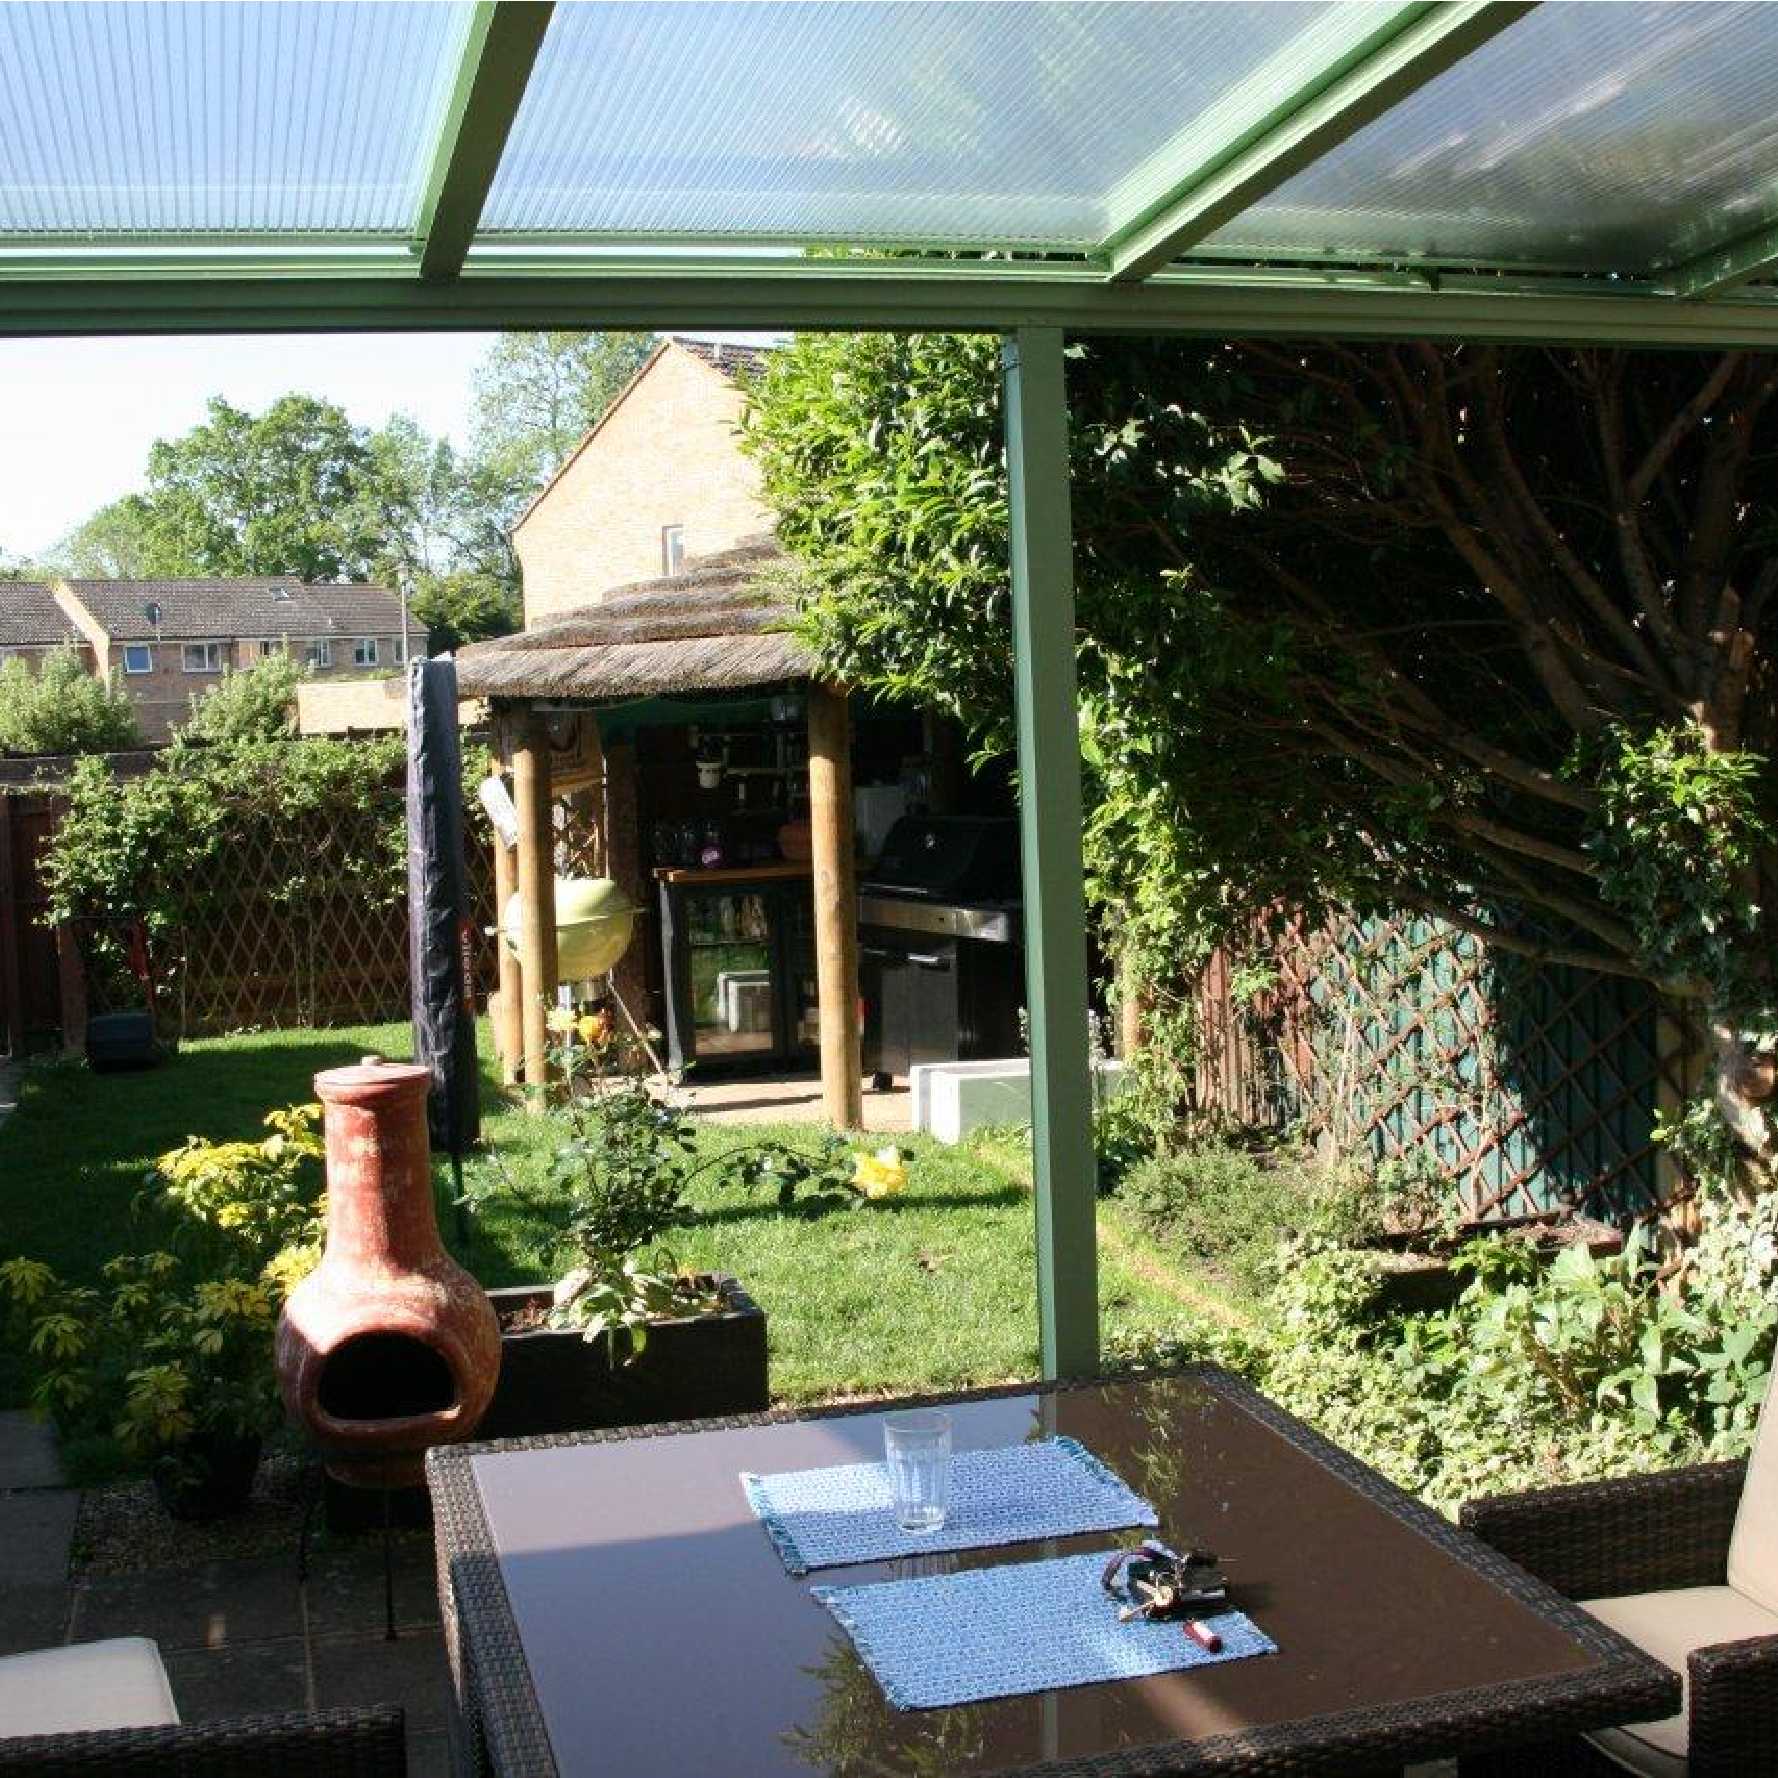 Affordable Omega Smart Lean-To Canopy, White with 16mm Polycarbonate Glazing - 10.6m (W) x 2.0m (P), (5) Supporting Posts